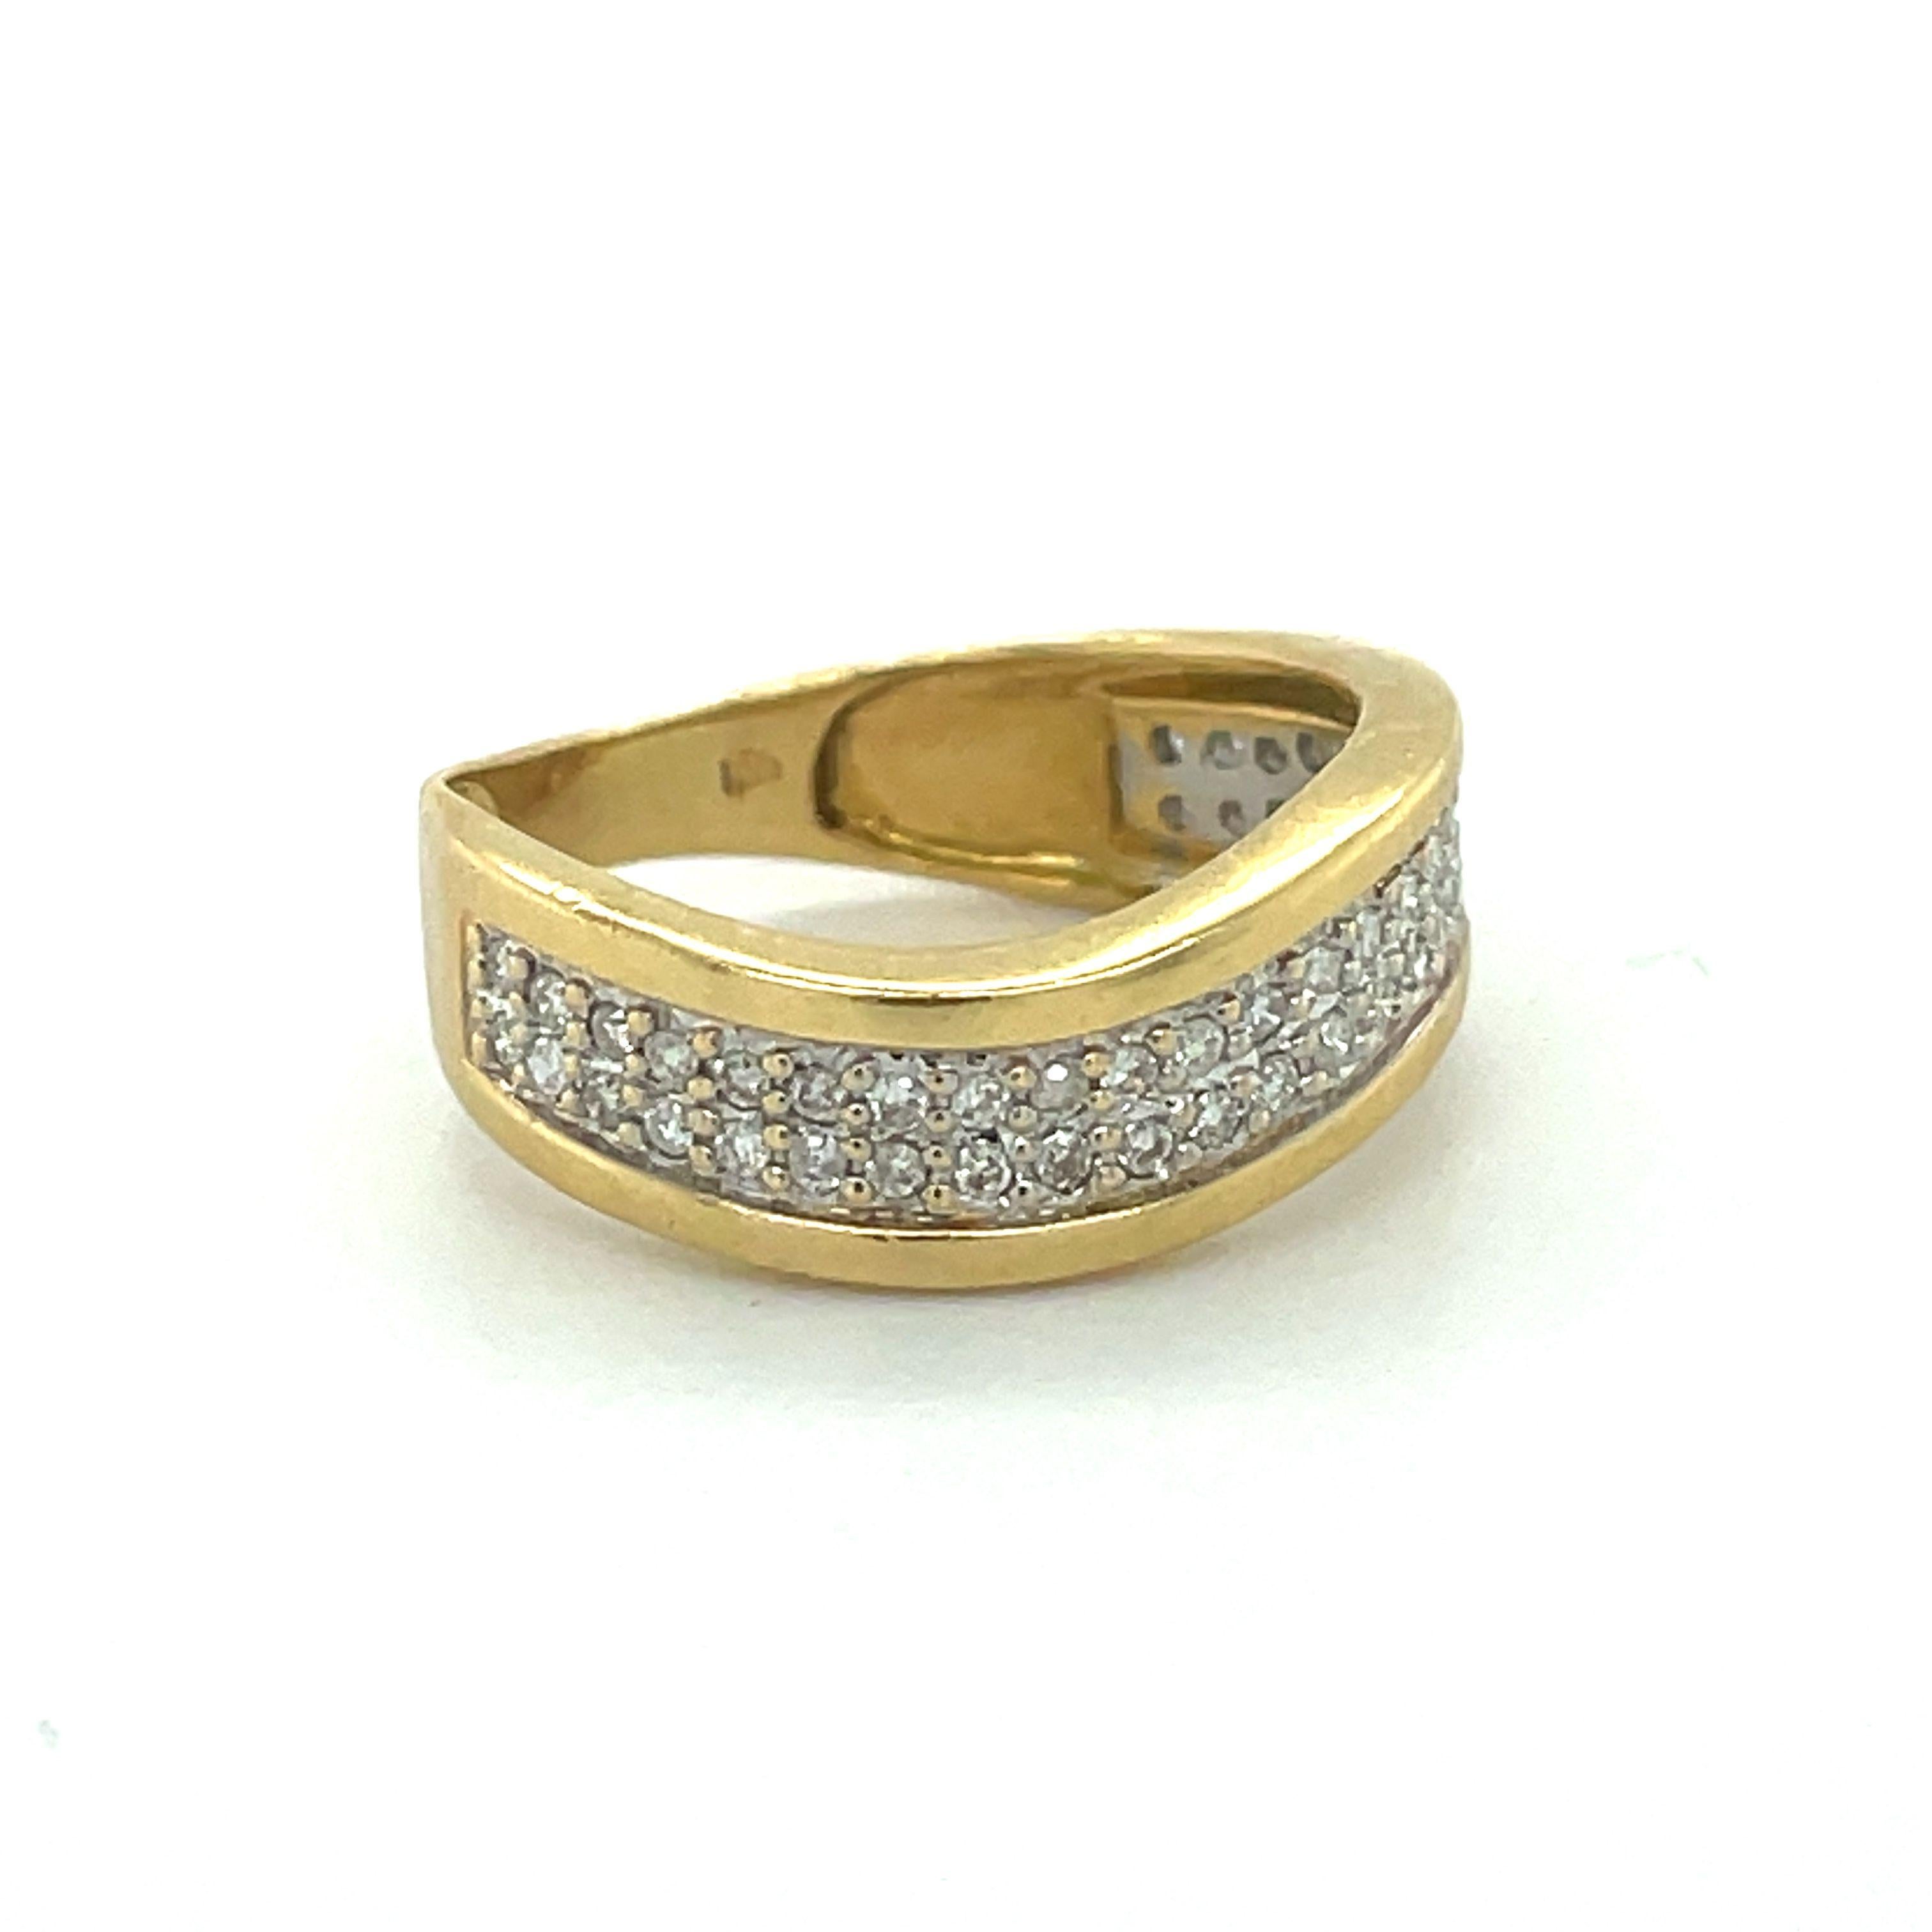 Vintage Gold Wave Band, 0.25CT Diamond, 18k Yellow Gold ring, weddding band ring In Excellent Condition For Sale In Ramat Gan, IL